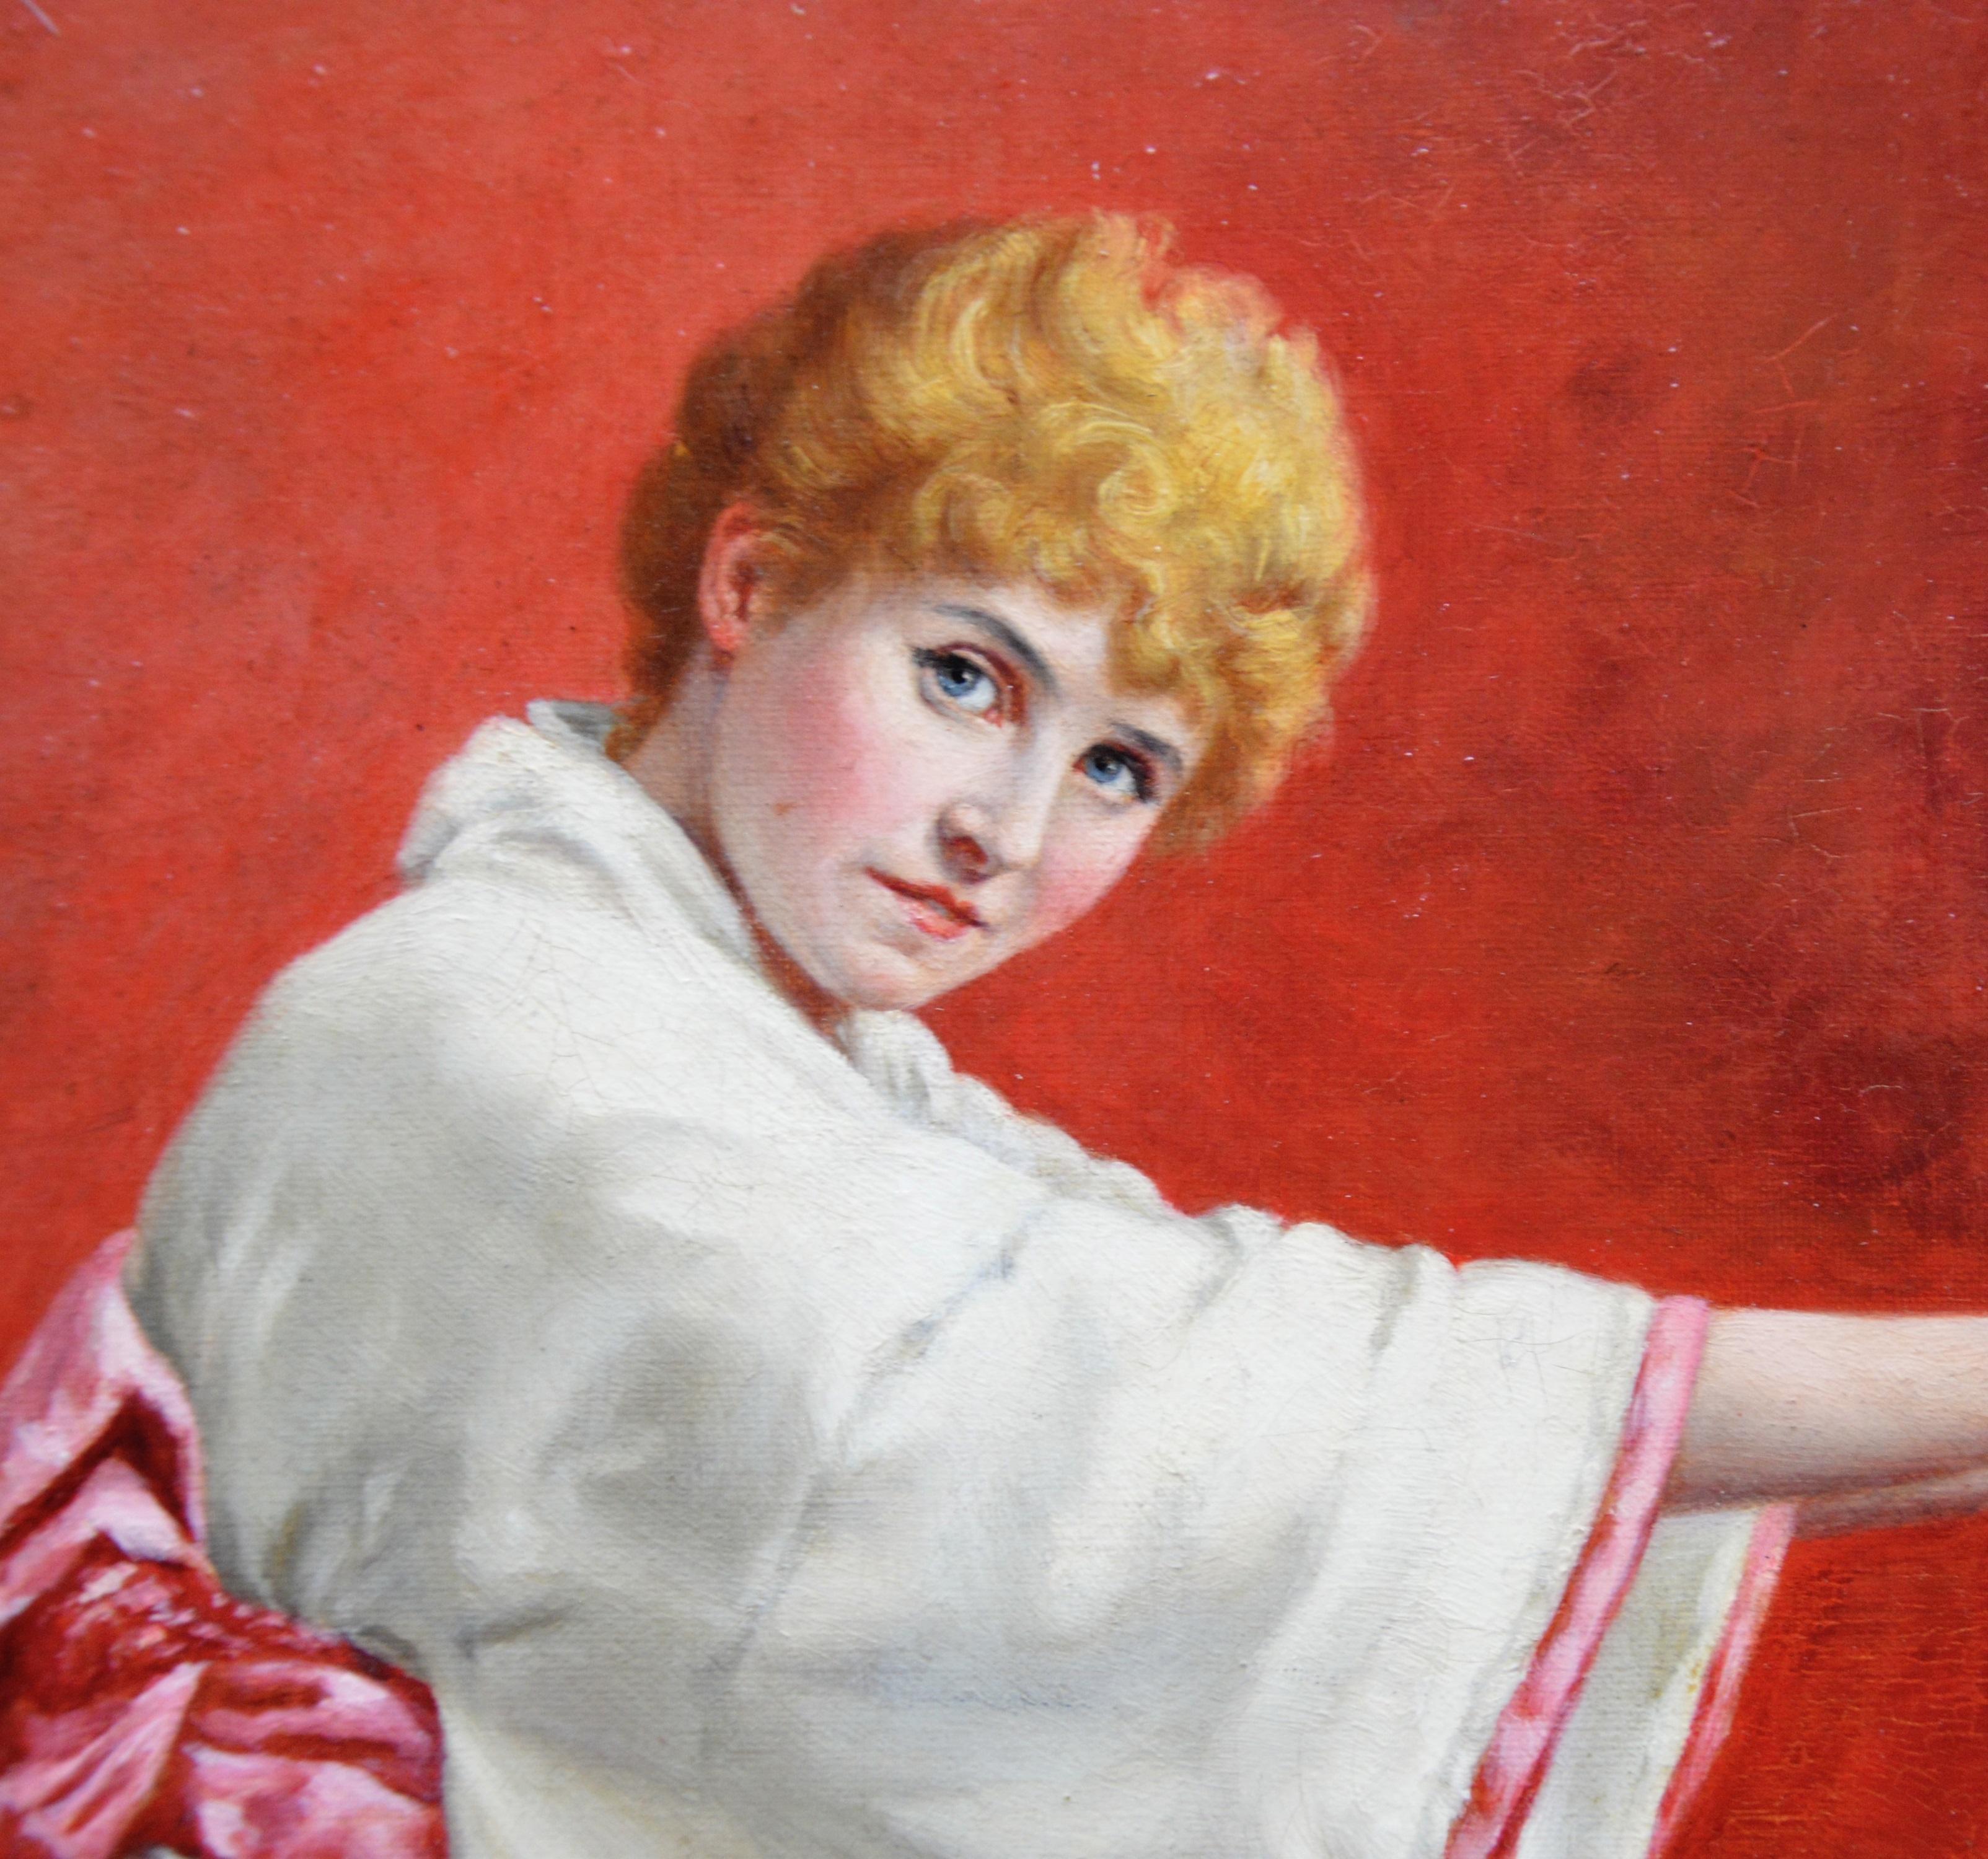 This is a fine 19th century full-length oil on canvas portrait of a red-headed ‘Girl in a Kimono’ by the Royal Academy painter Clara Murray Hawkes (1861-1930). The painting is signed by the artist and dated 1896. It is presented in a newly